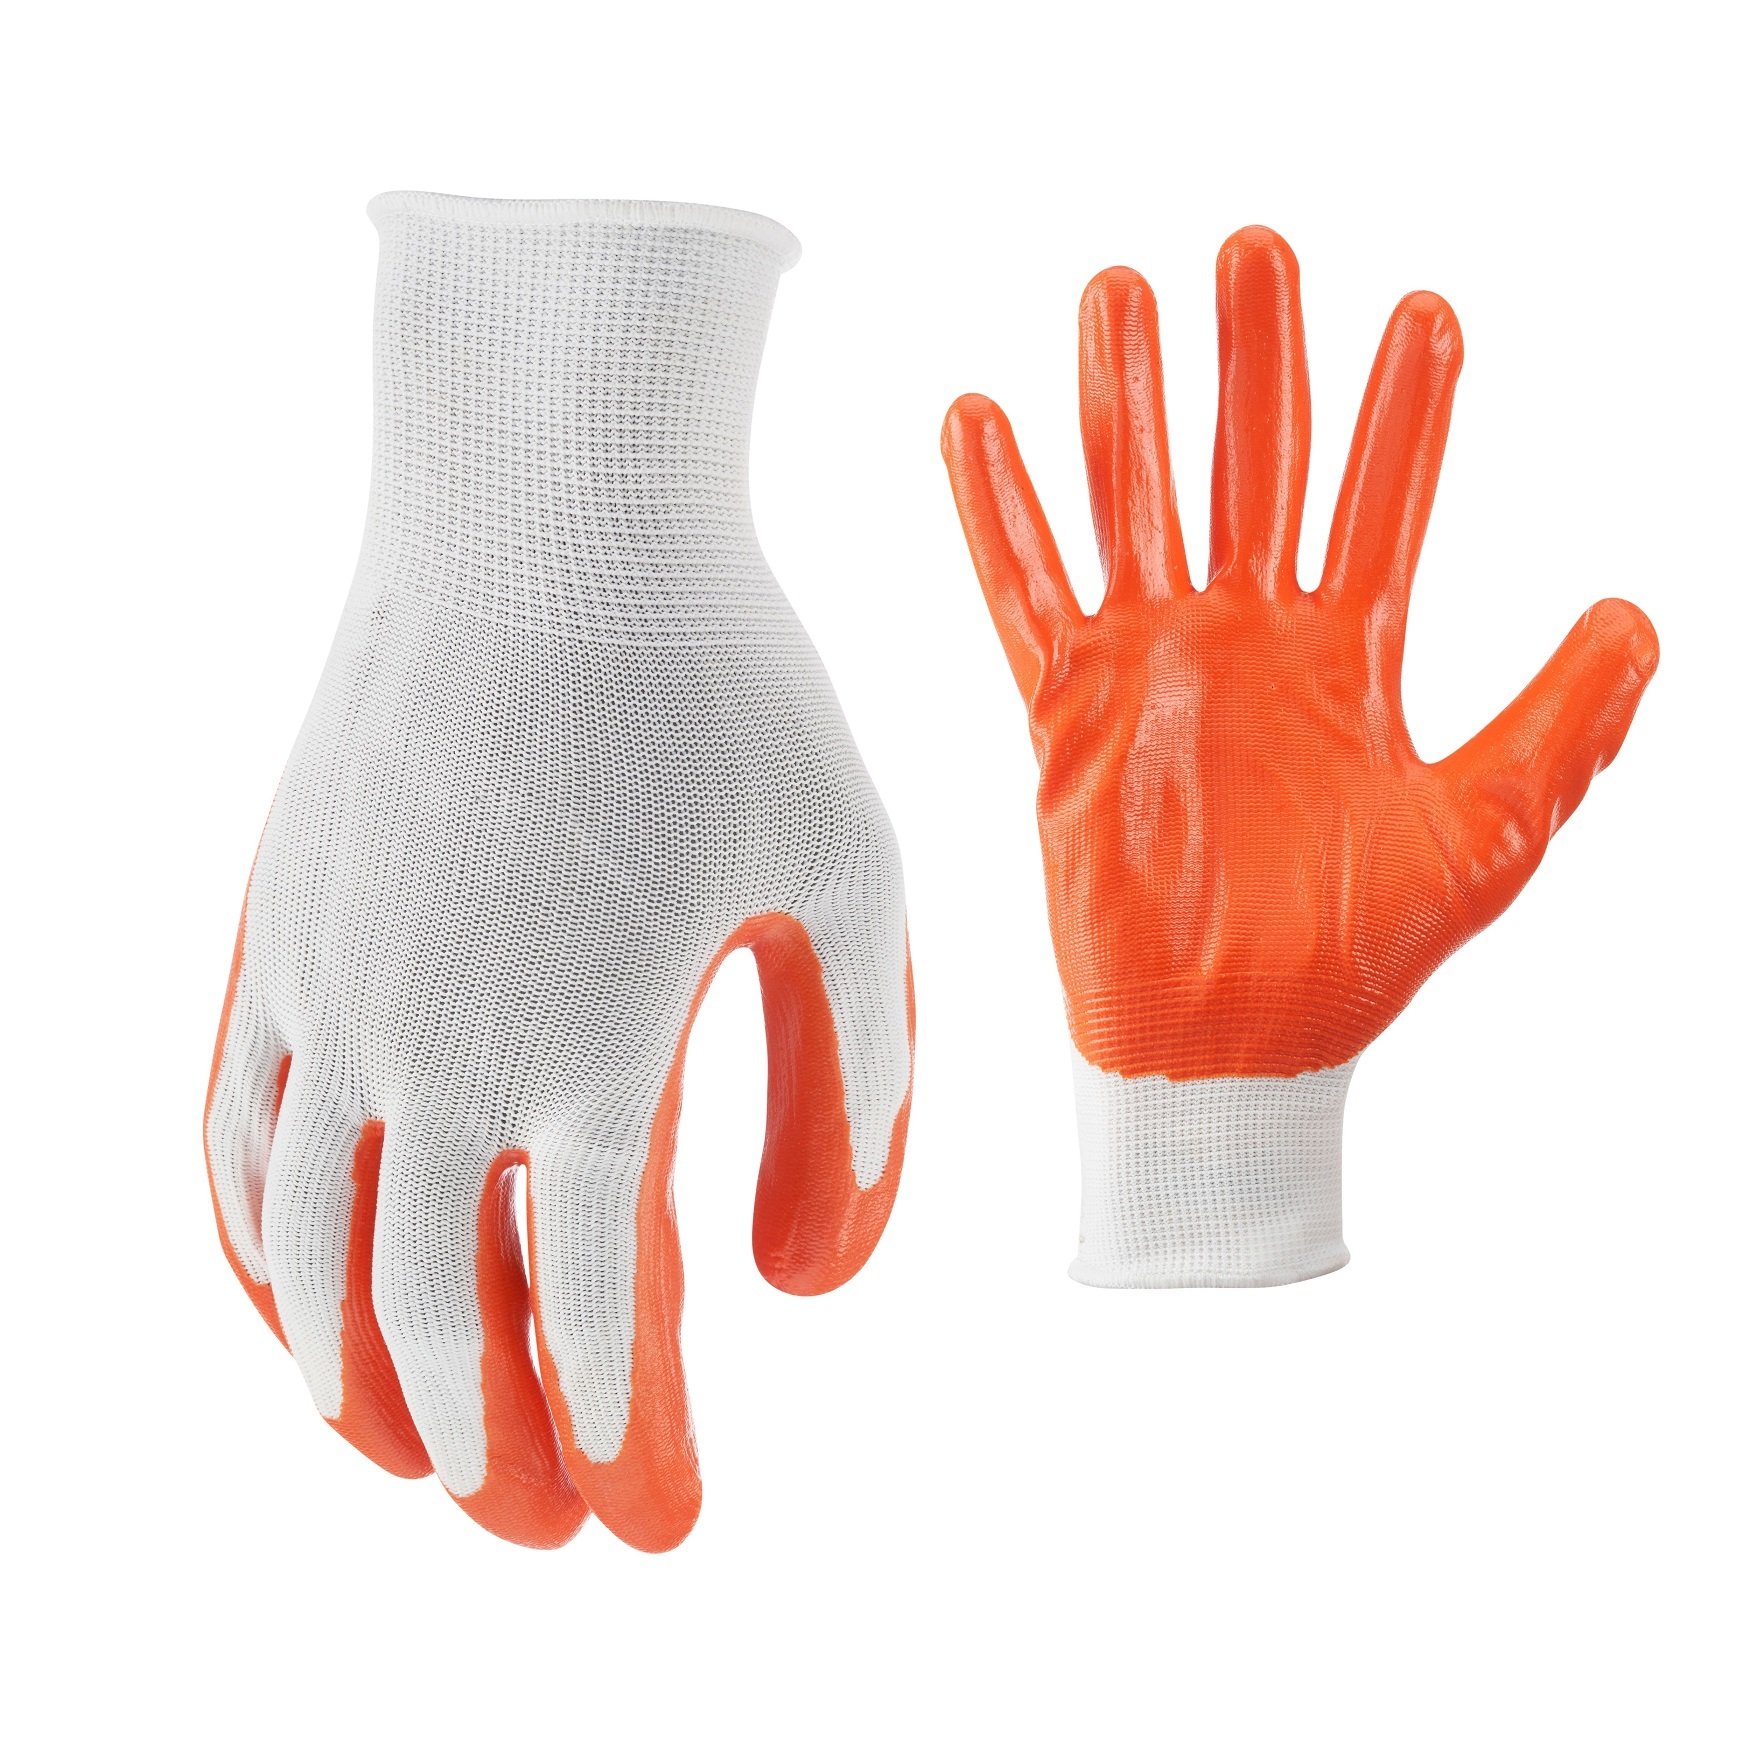 Details about   Safety Work Gloves Nitrile Coated For Men And Women 8-Pair-Pack Knit Firm Grip 